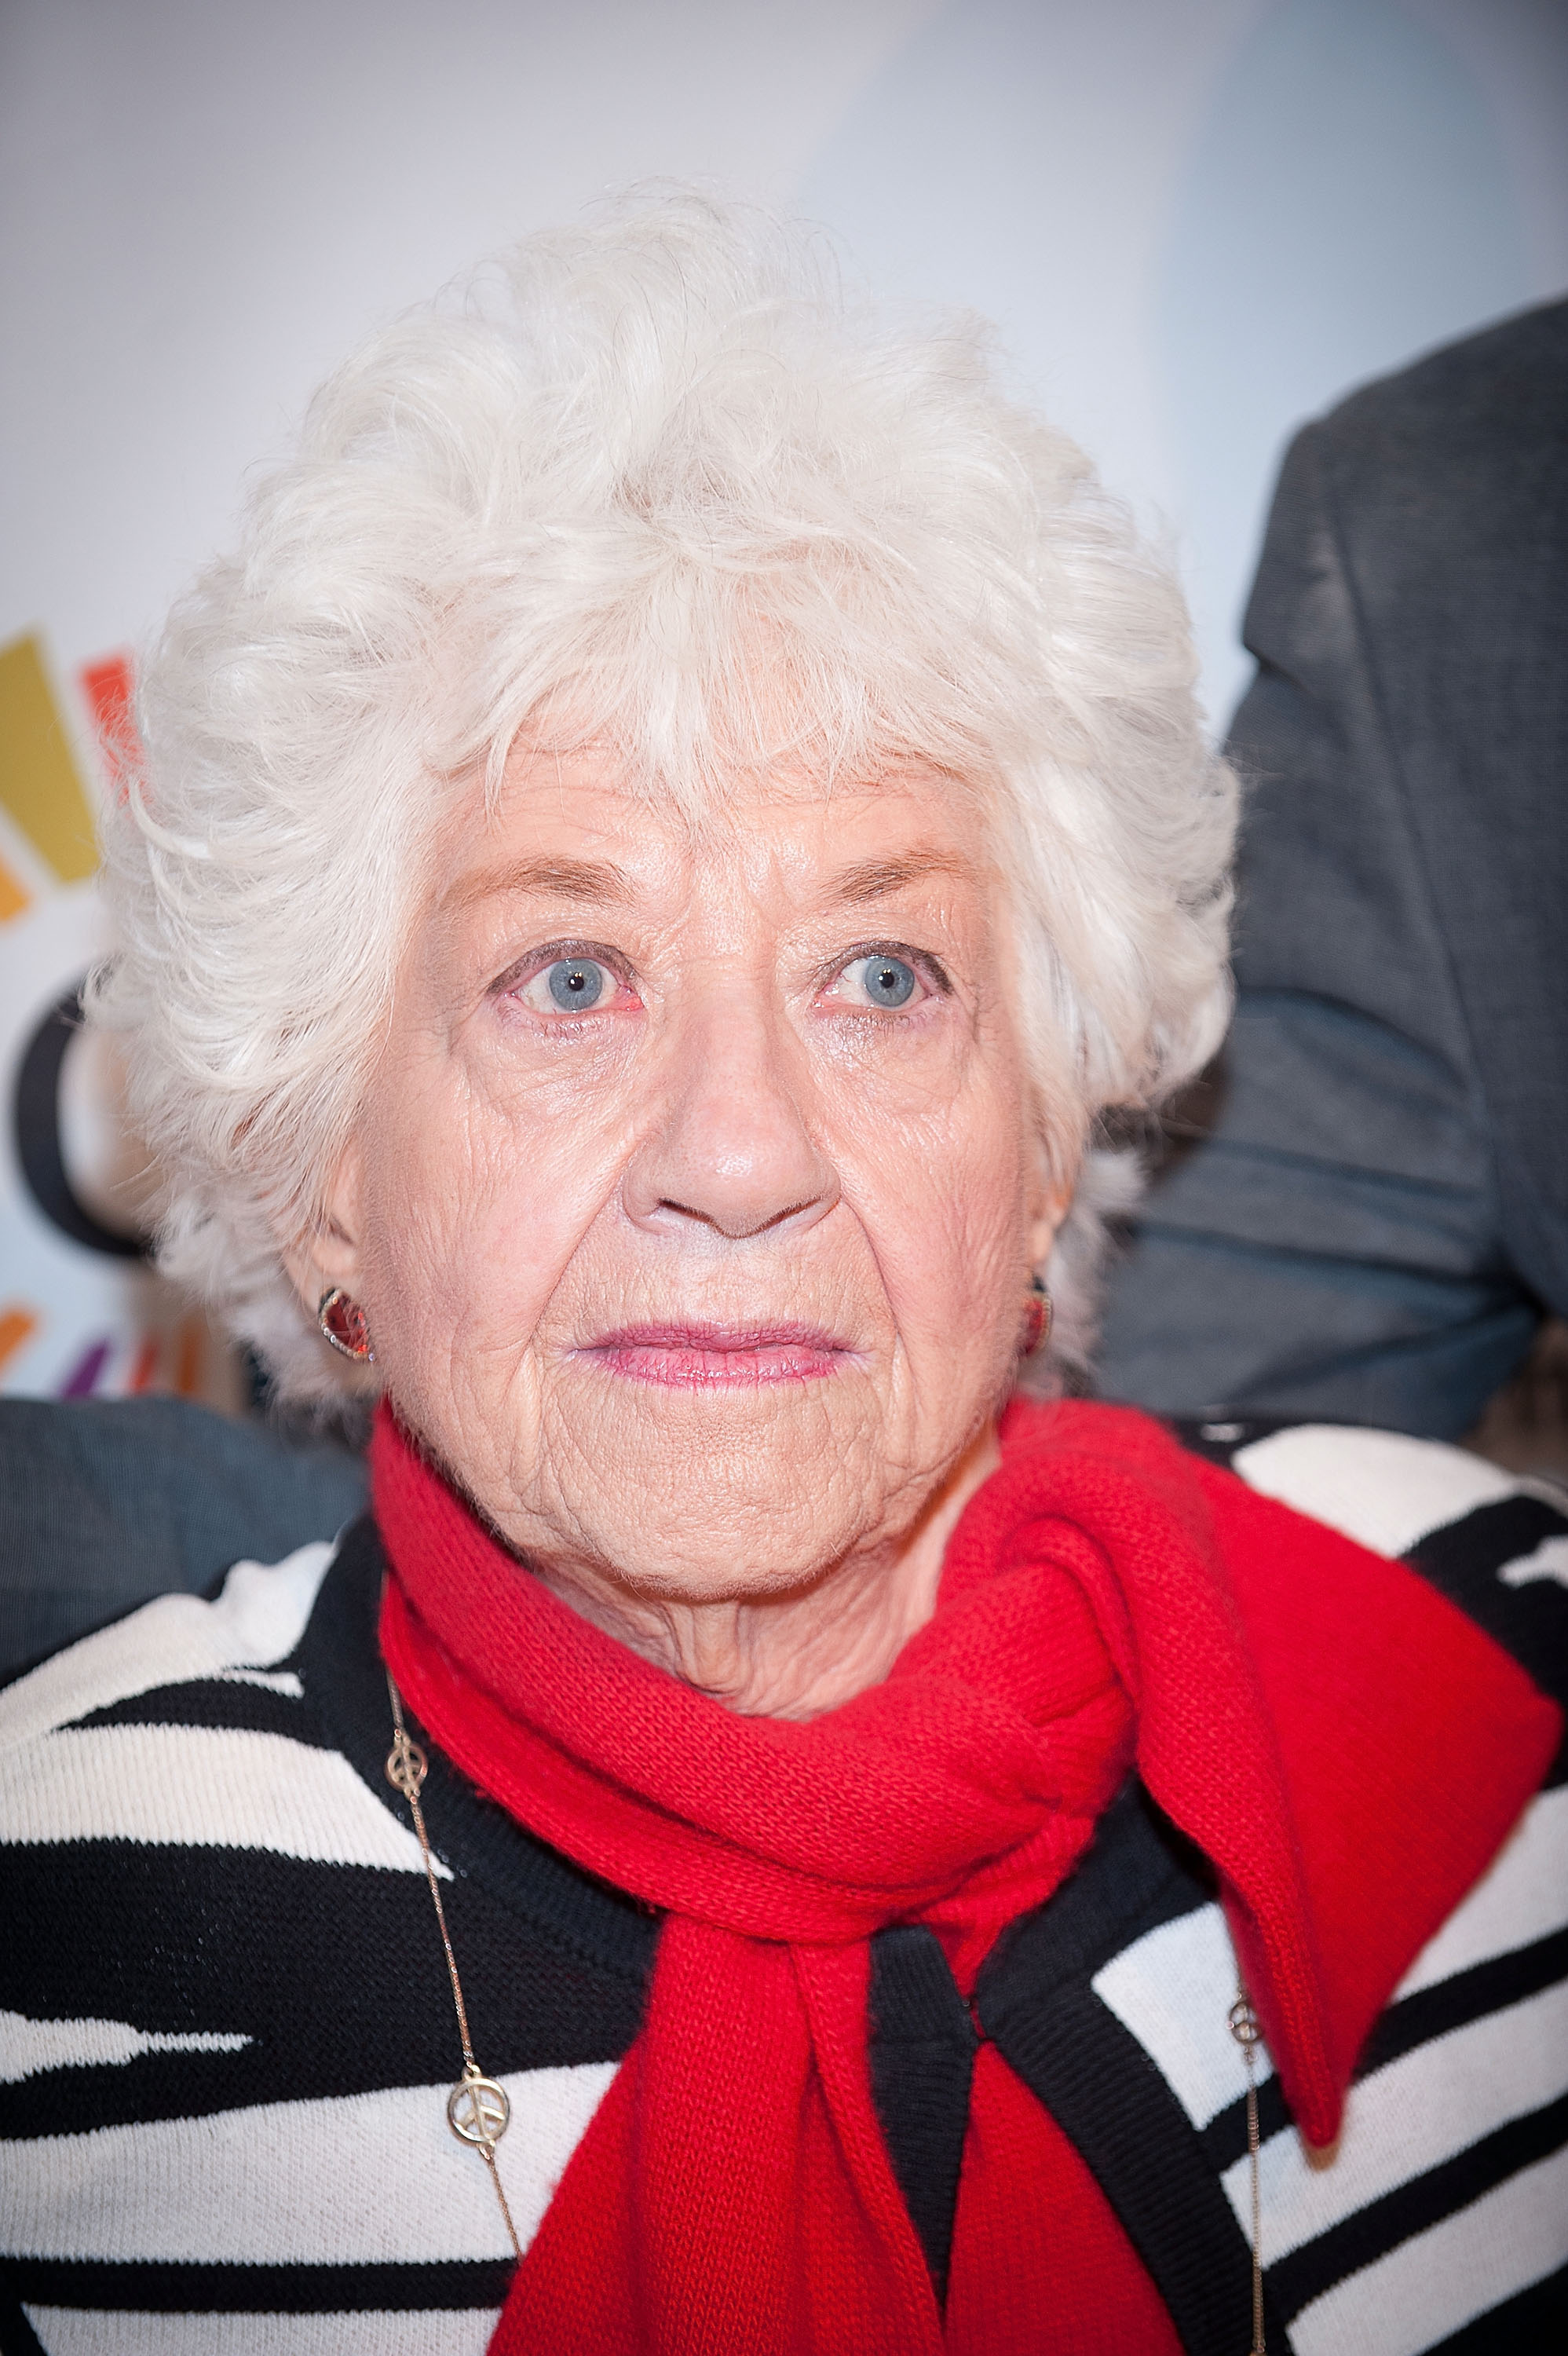 Charlotte Rae at The Center Dinner to benefit the Lesbian, Gay, Bisexual & Transgender Community Center held at the Metropolitan Pavilion on March 21, 2011 in New York City | Source: Getty Images